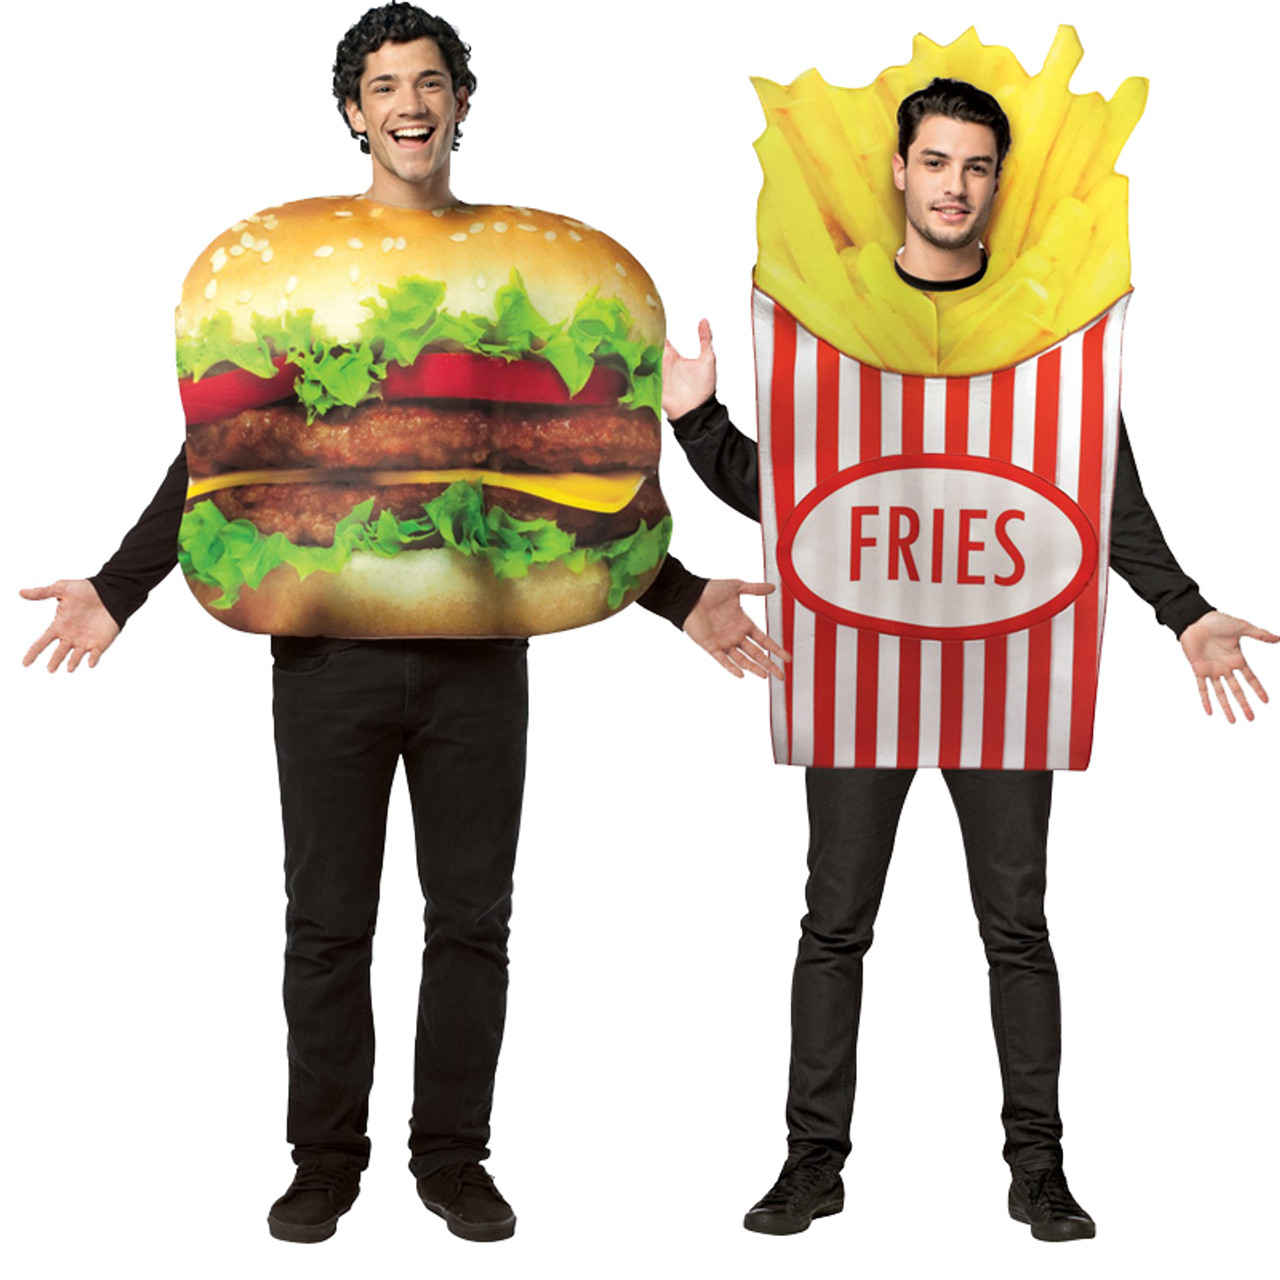 Burger and Fries Costume Set